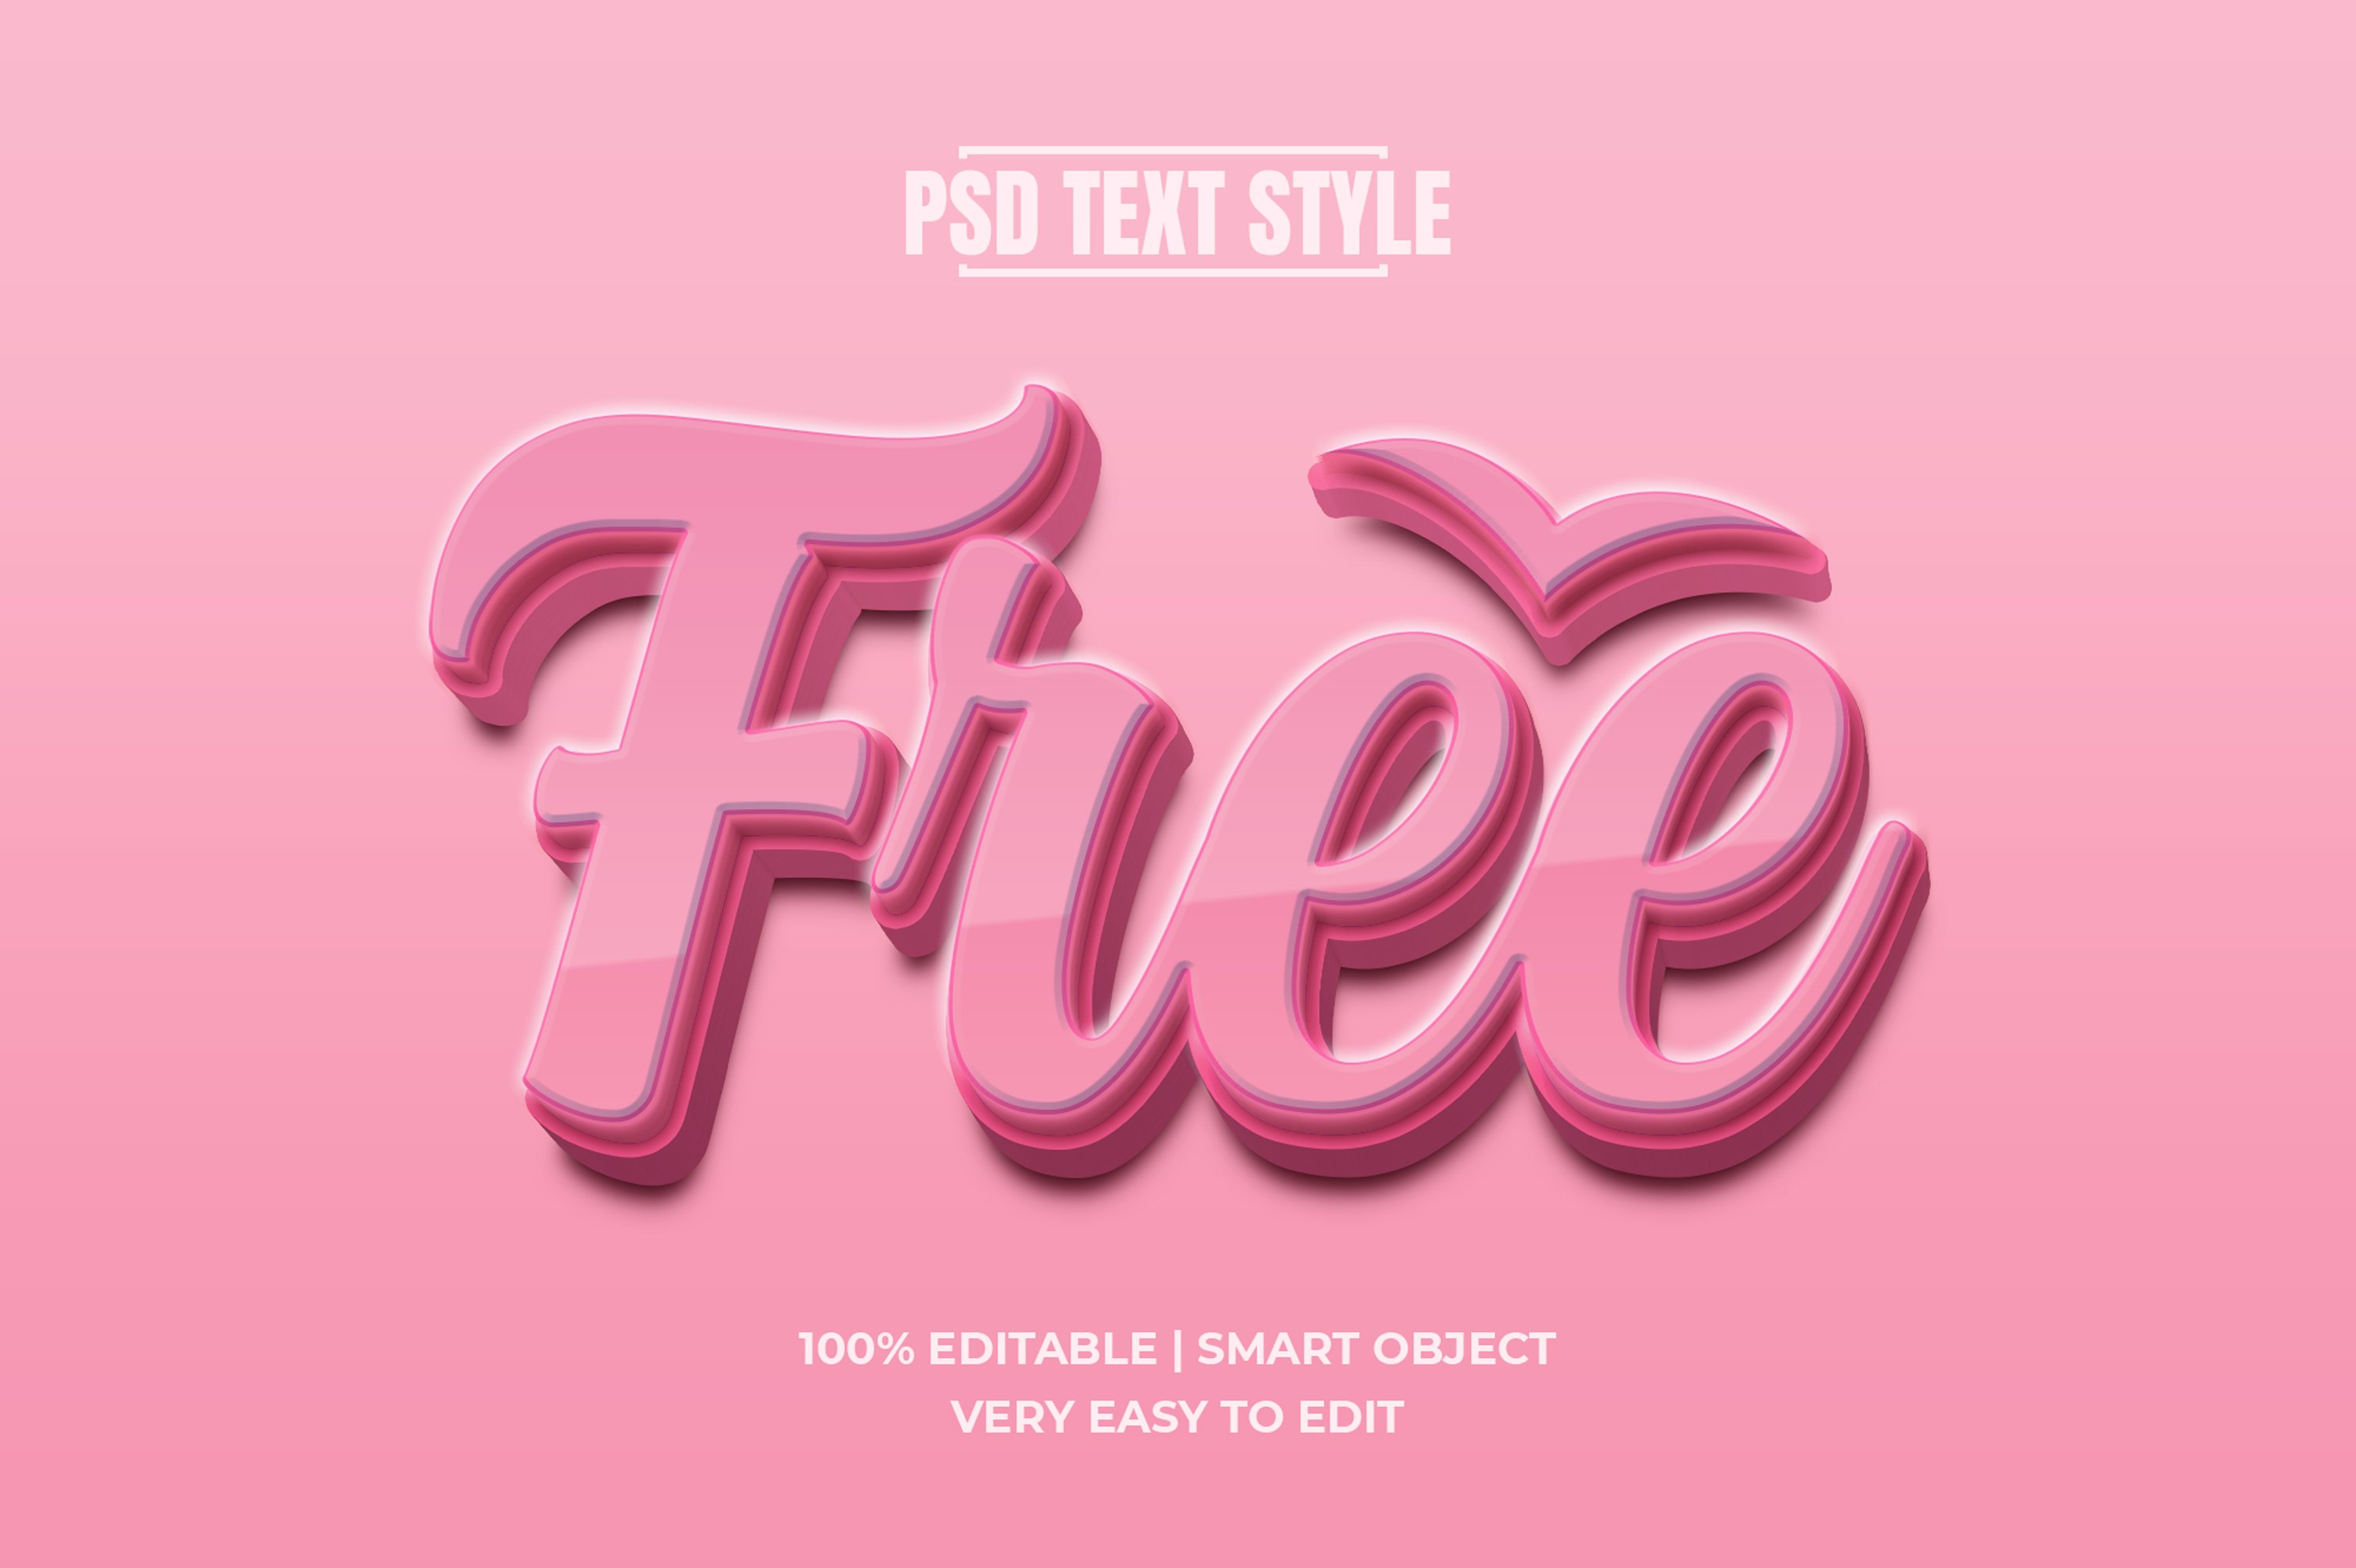 Pink Free 3D Text Effect PSD Mockupcover image.